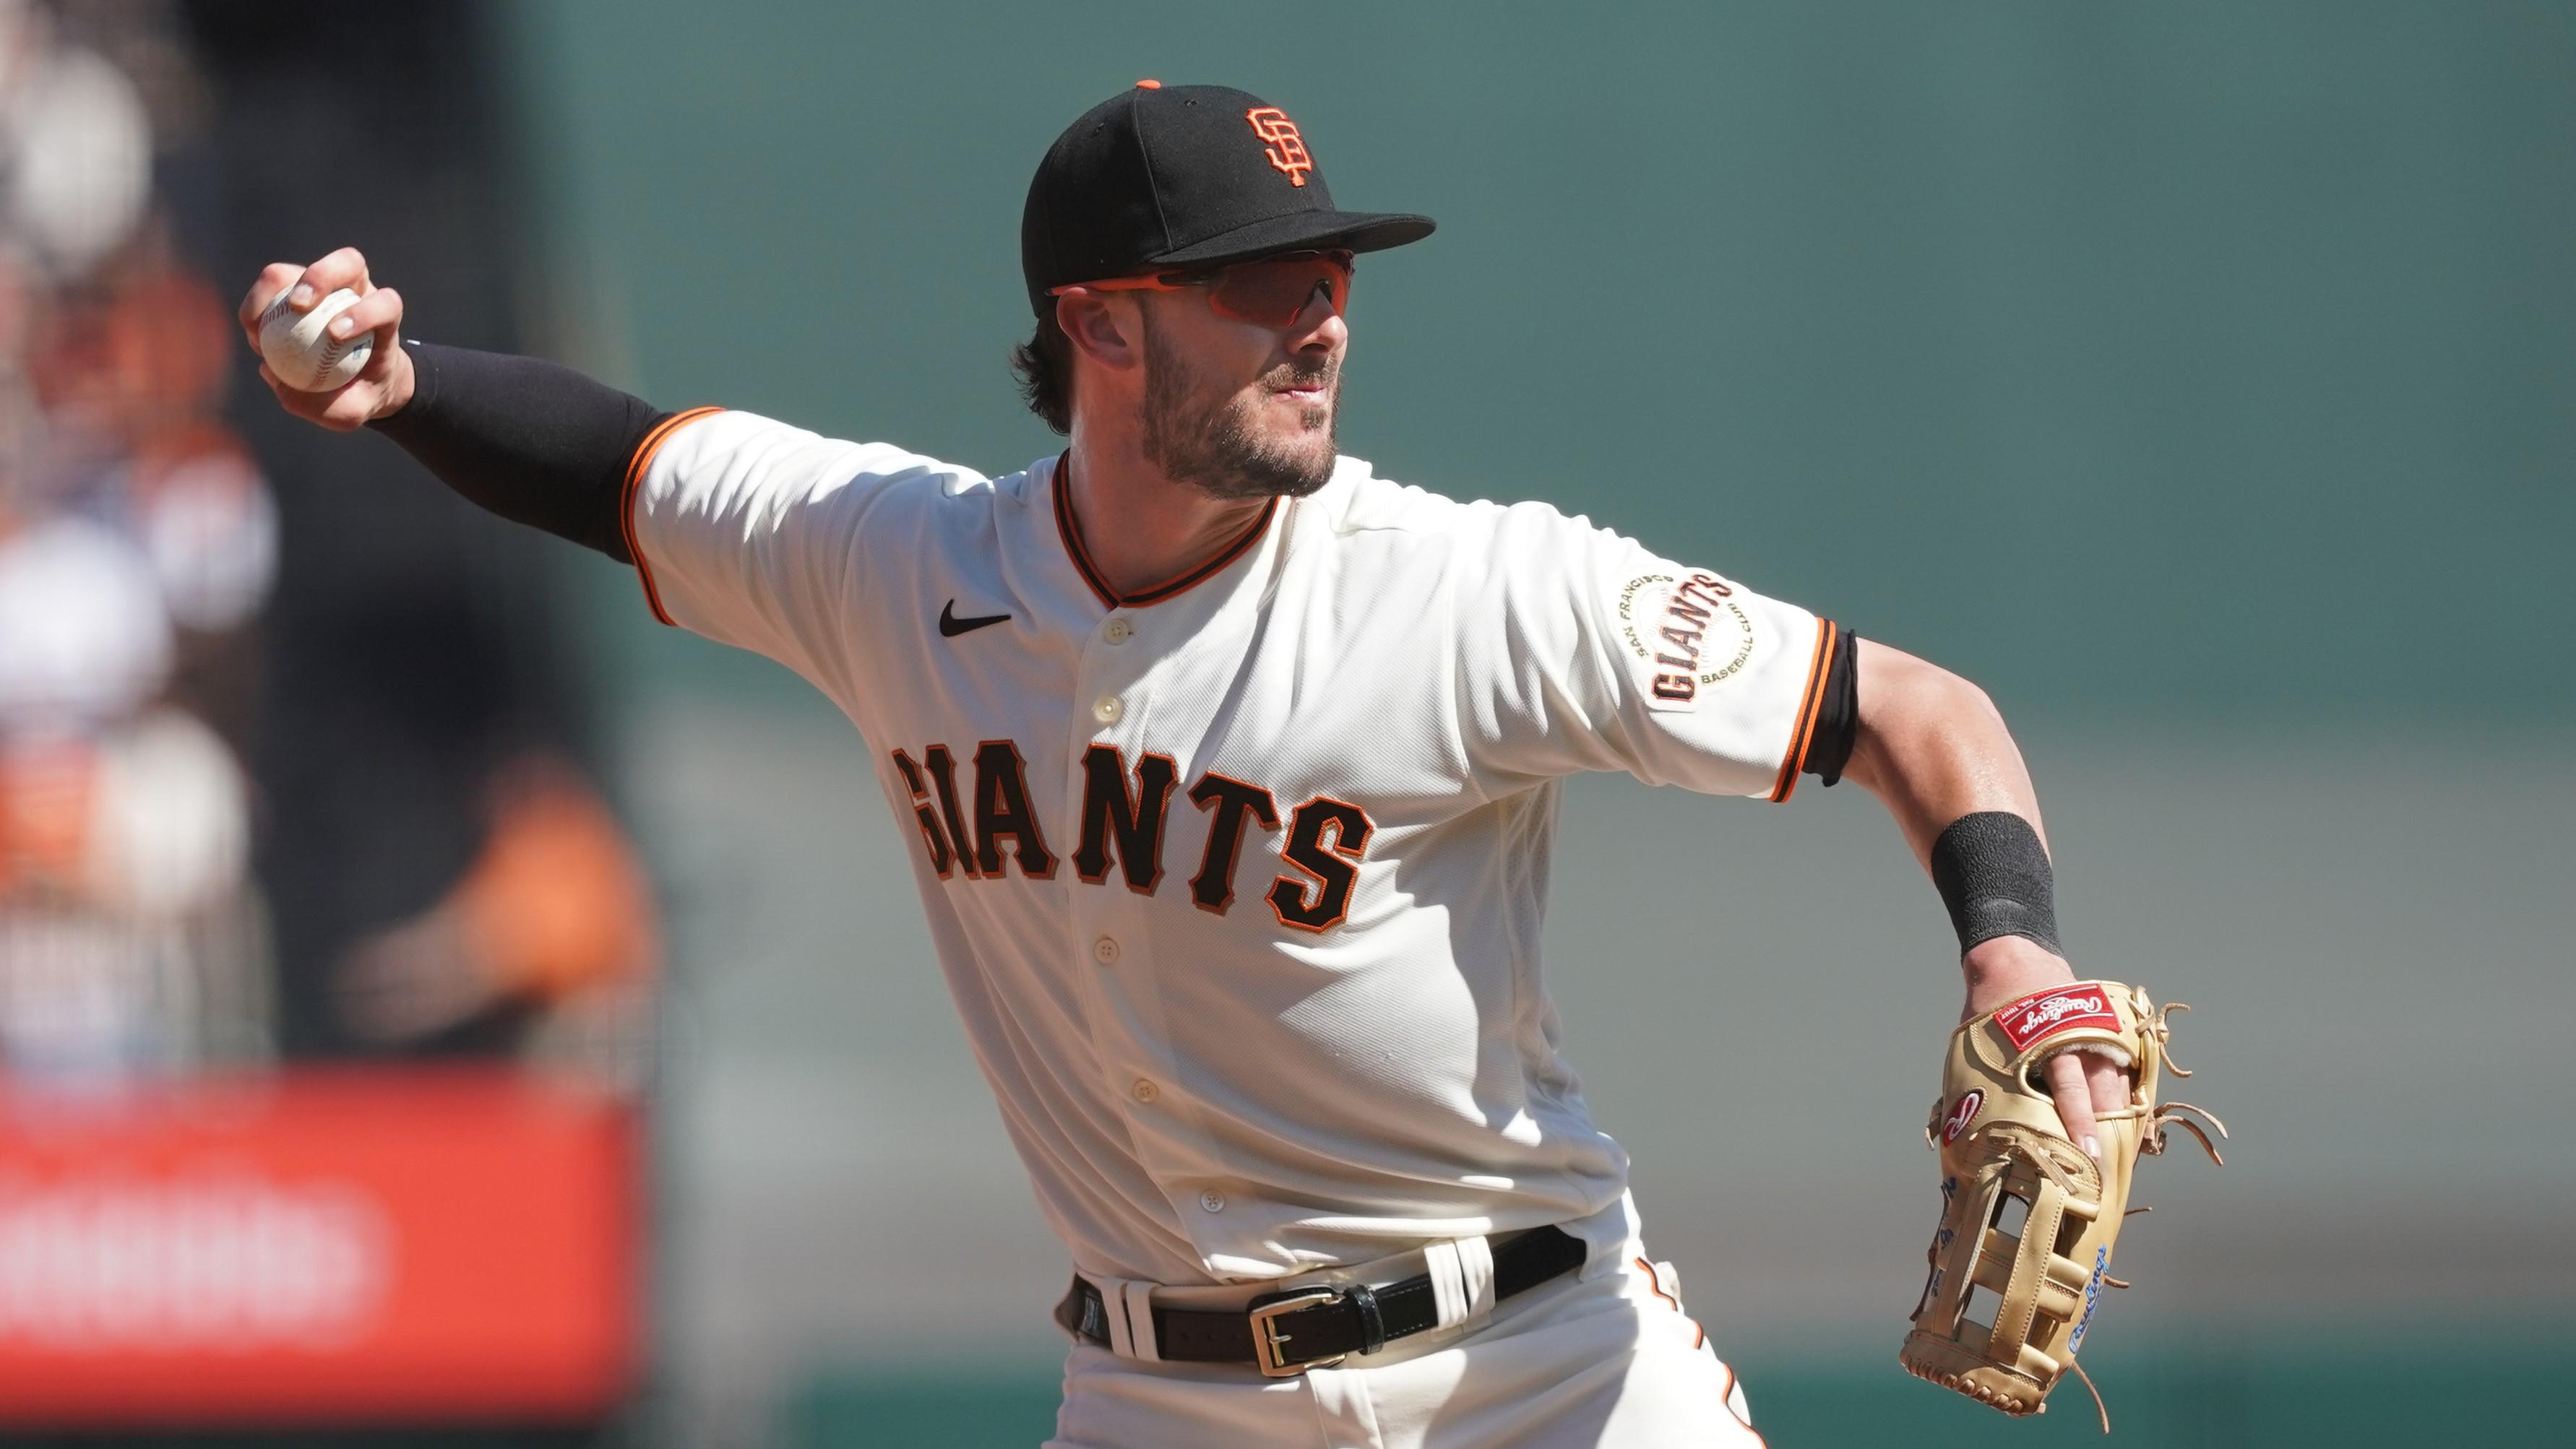 San Francisco Giants third baseman Kris Bryant (23) throws the ball to first base to record an out during the fourth inning against the San Diego Padres at Oracle Park. / Darren Yamashita-USA TODAY Sports